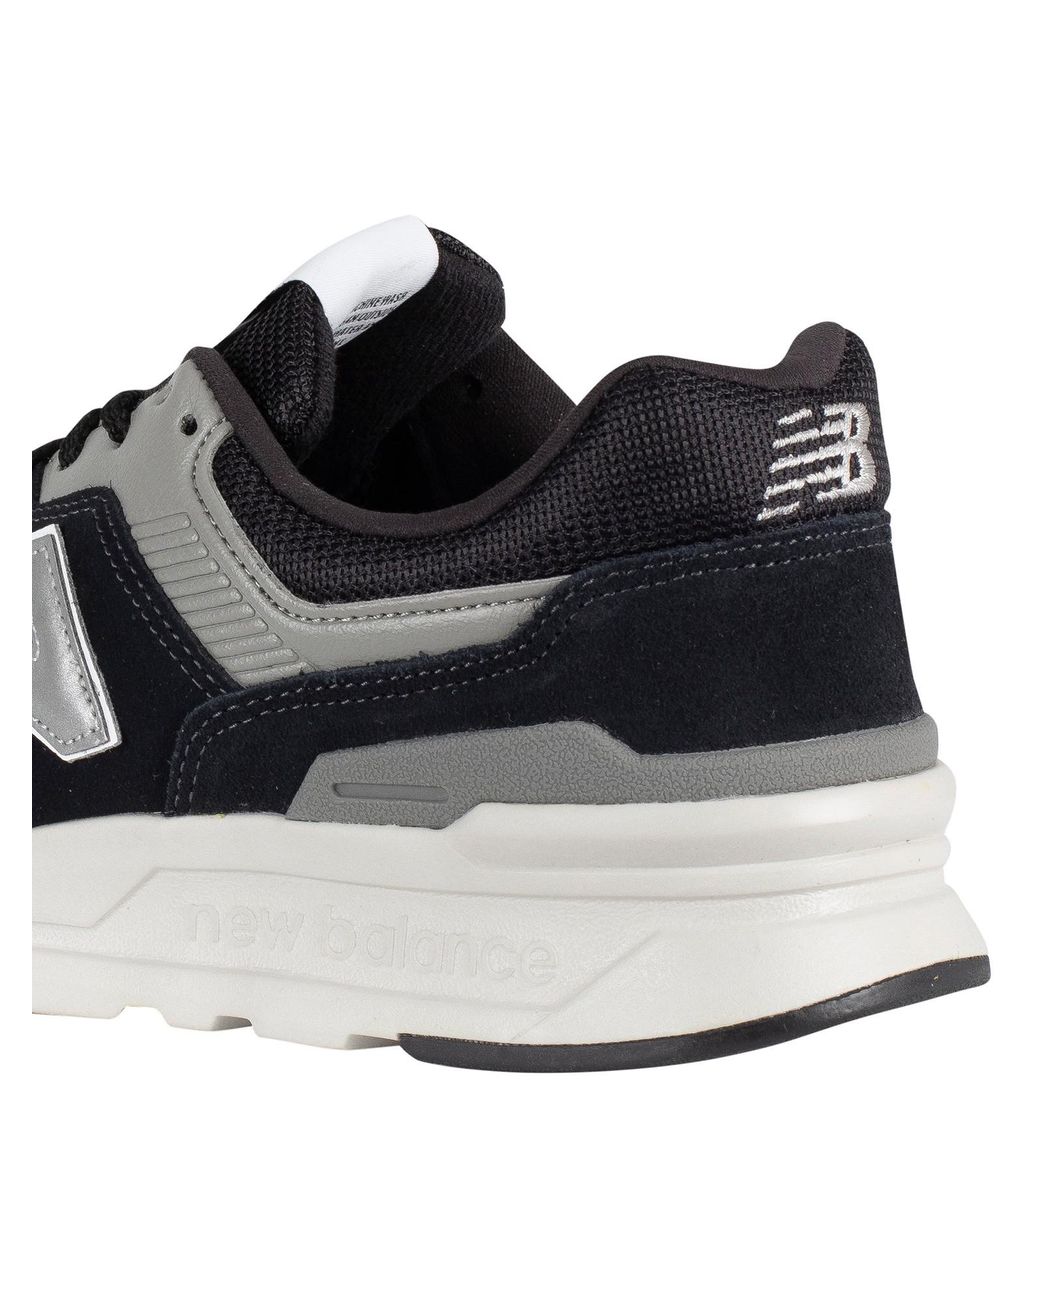 New Balance 977 Suede Trainers in Black/Silver/Grey (Black) for ...